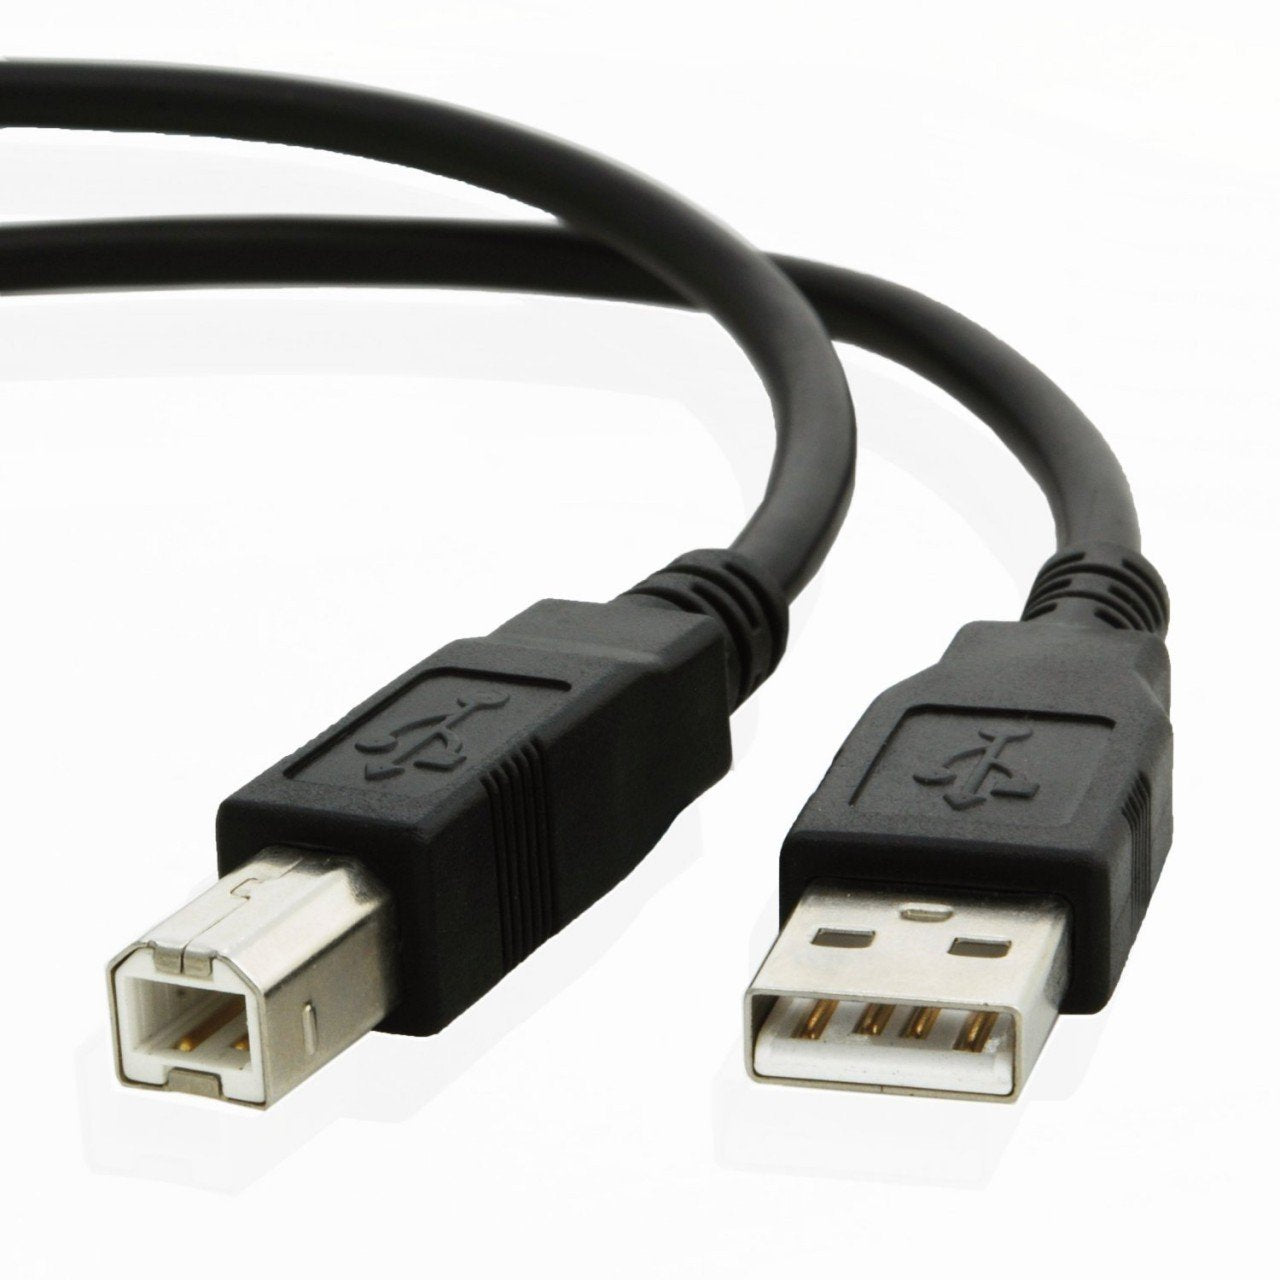 USB cable for Canon PIXMA TS5020